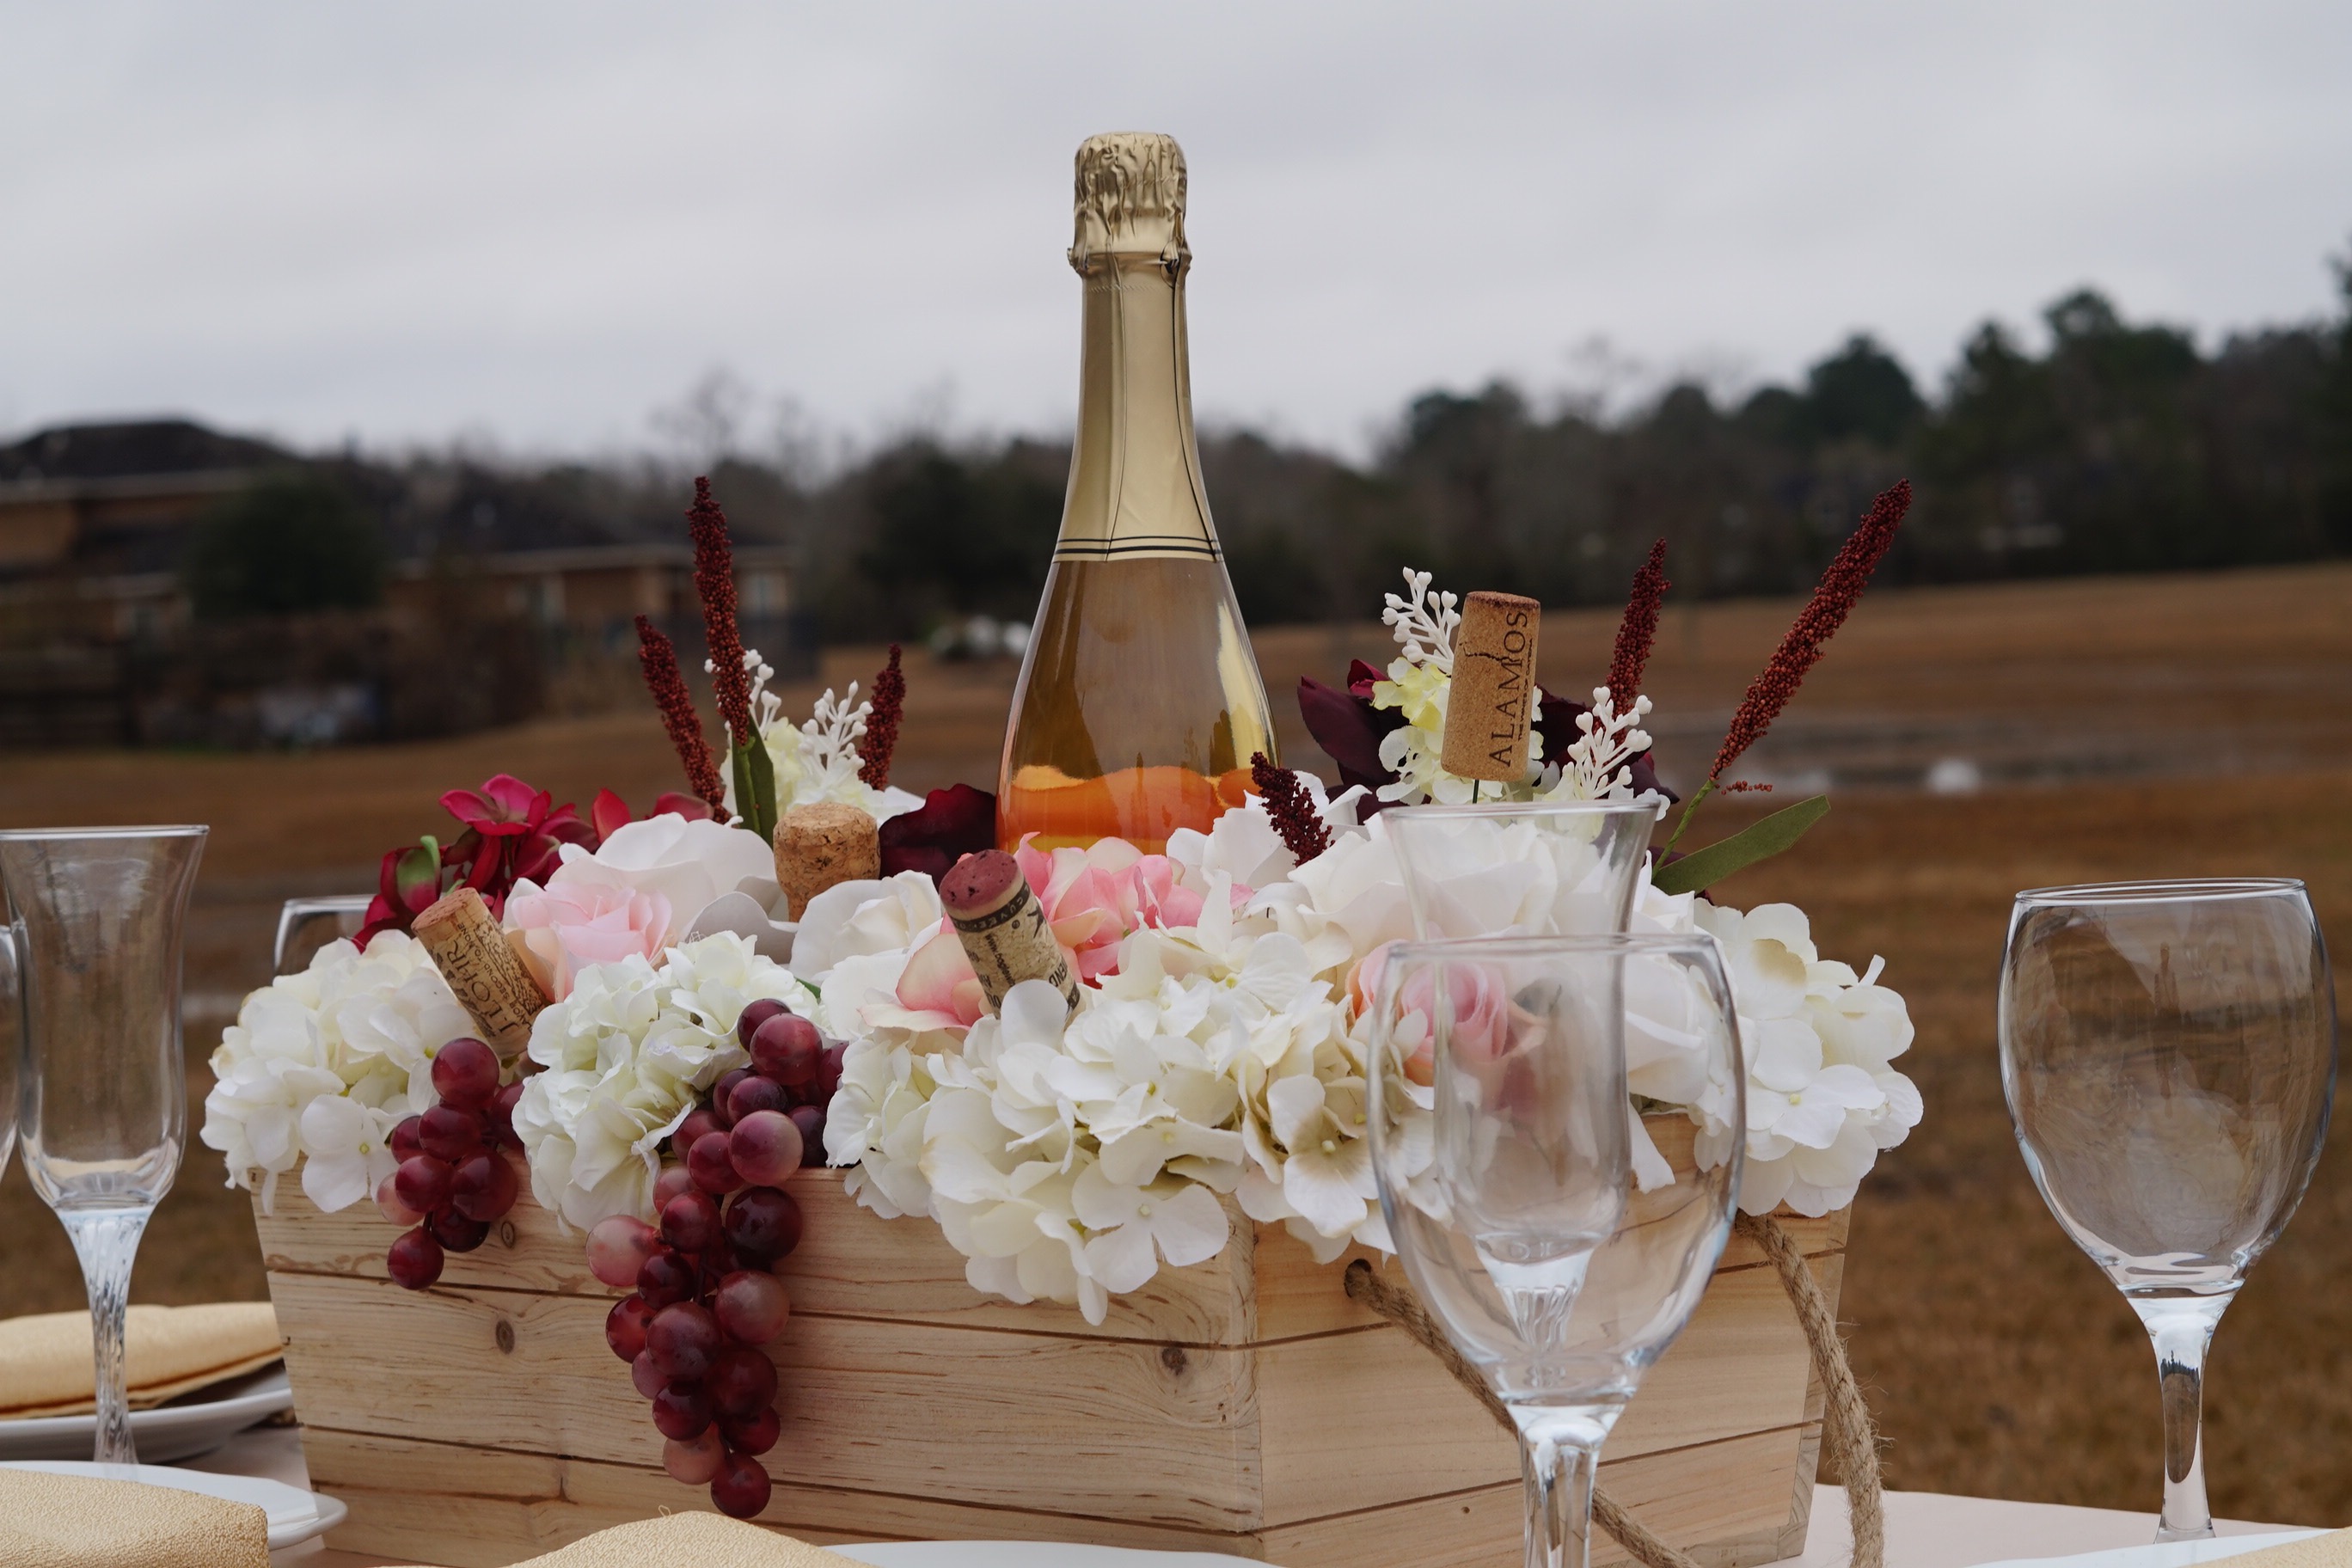 Rustic Wine Themed Wooden Crate Diy, Small Wooden Crates For Centerpieces